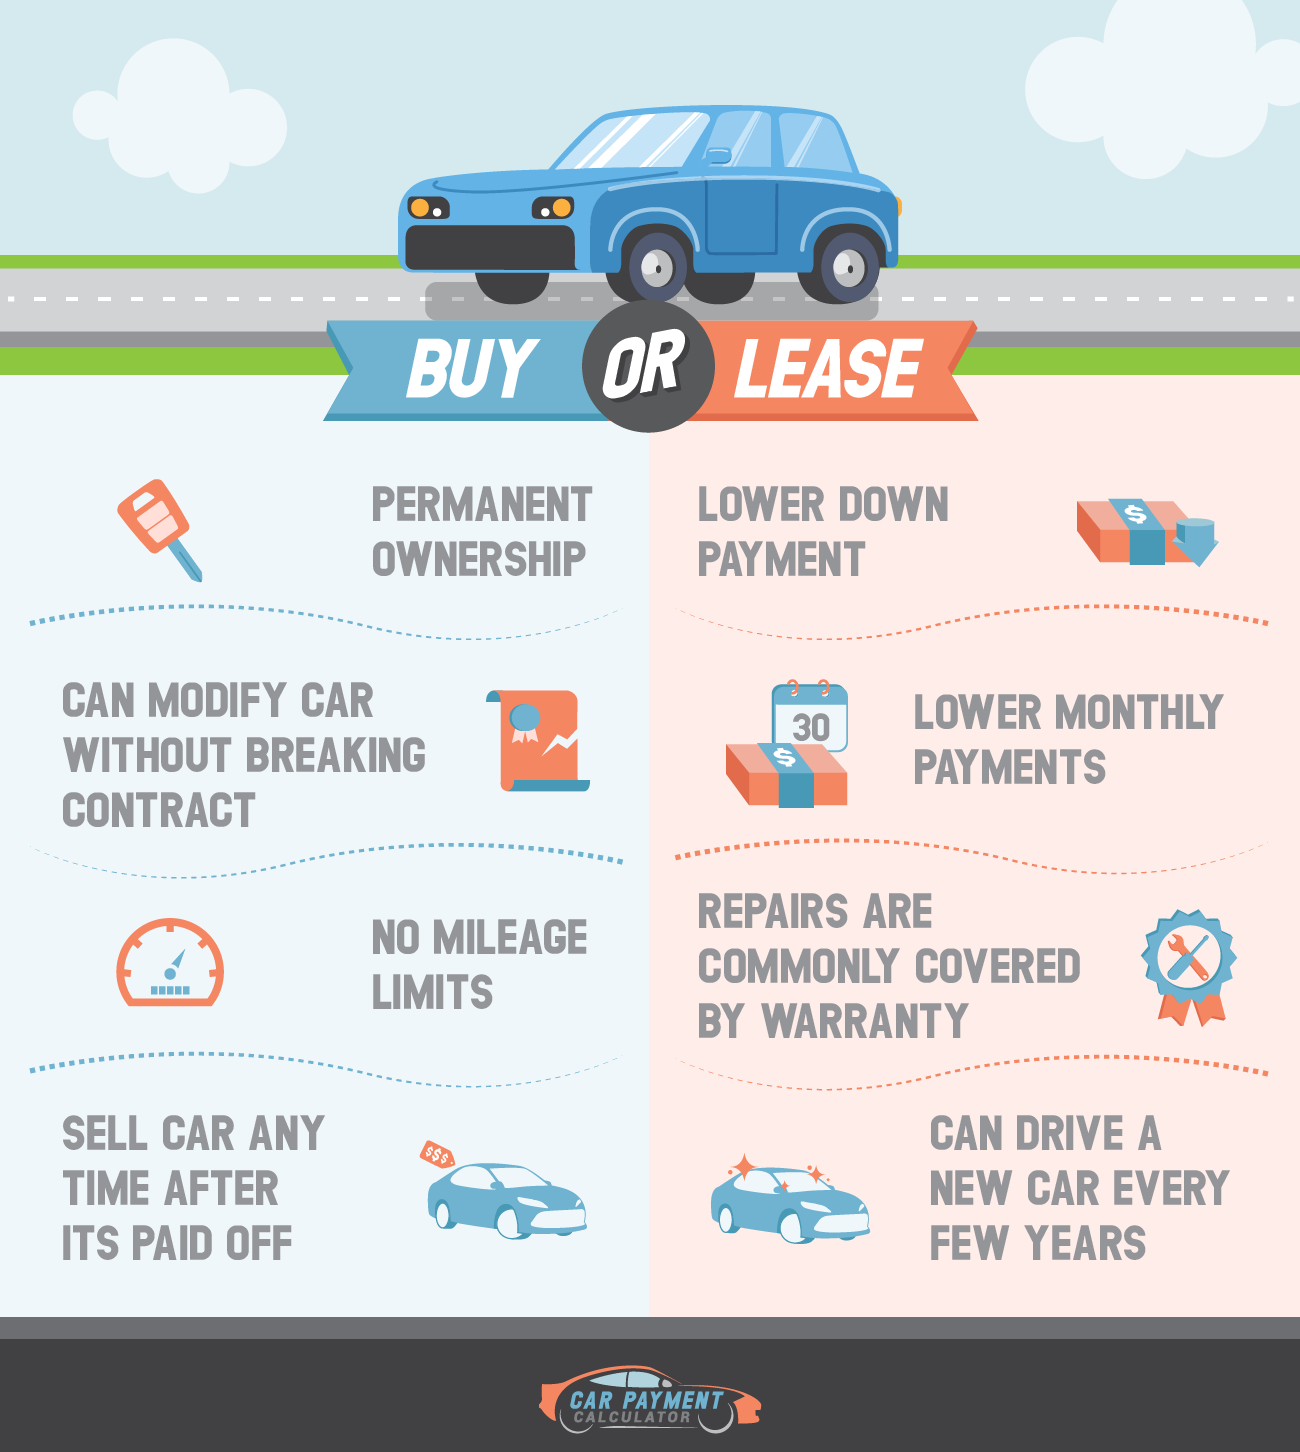 Auto Lease vs Buy Calculator Should You Buy or Lease a Car?